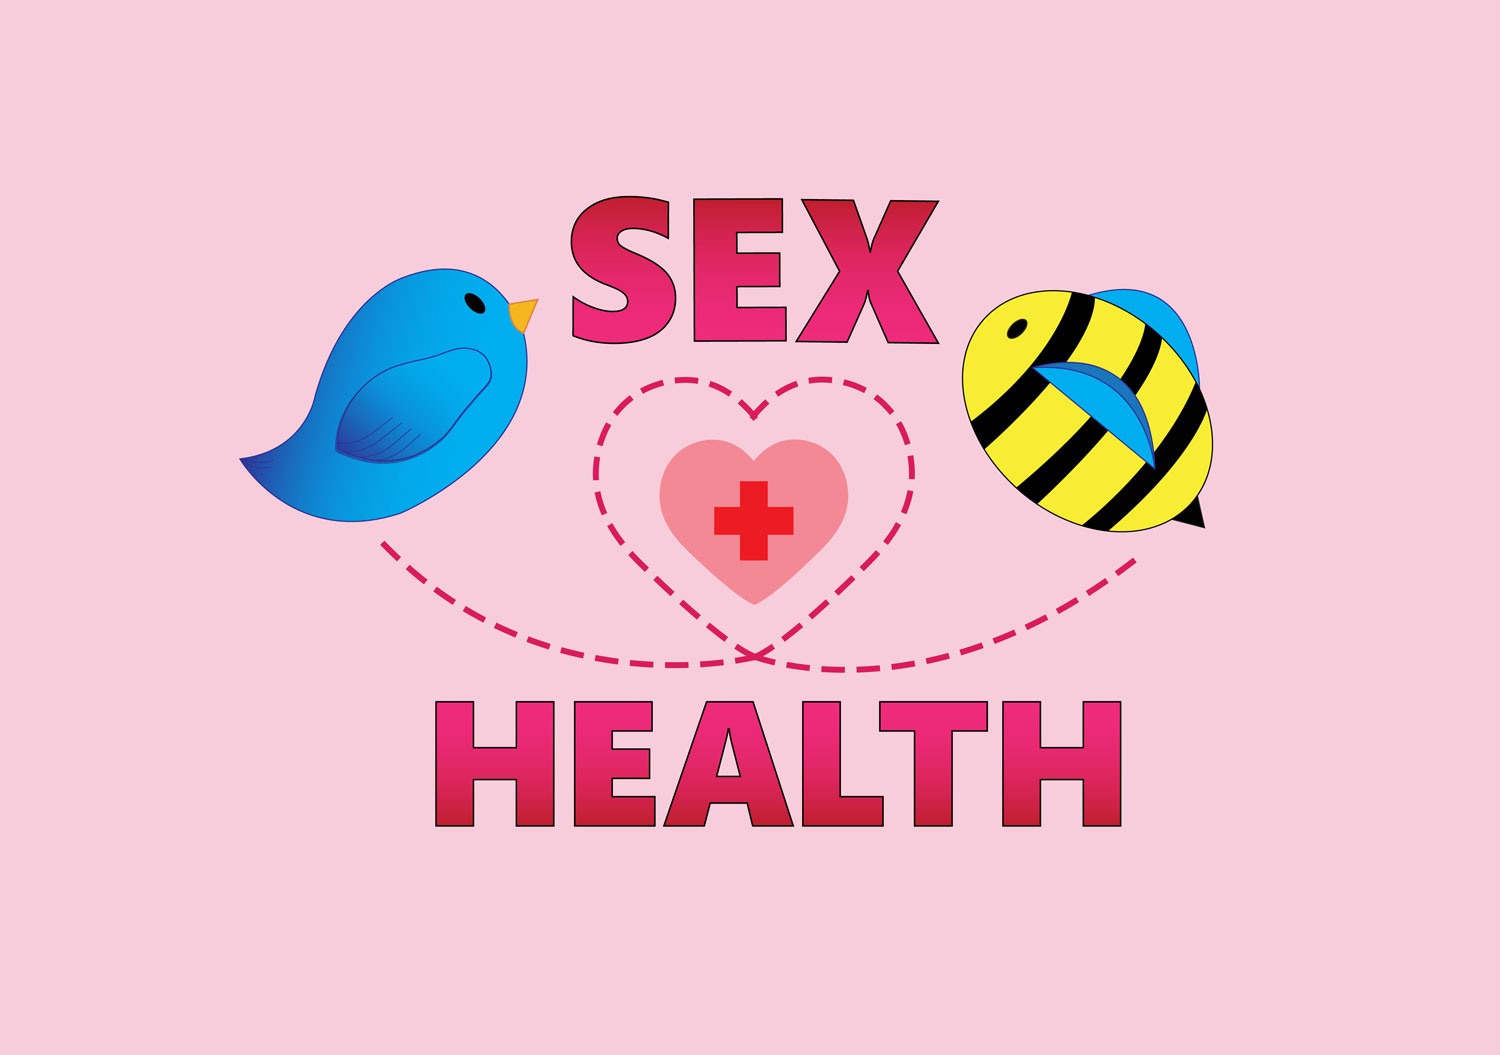 GRAPHIC: Sexual health is about making safe decisions when it comes to sex. Graphic by The Signal reporter Liliana Marin.